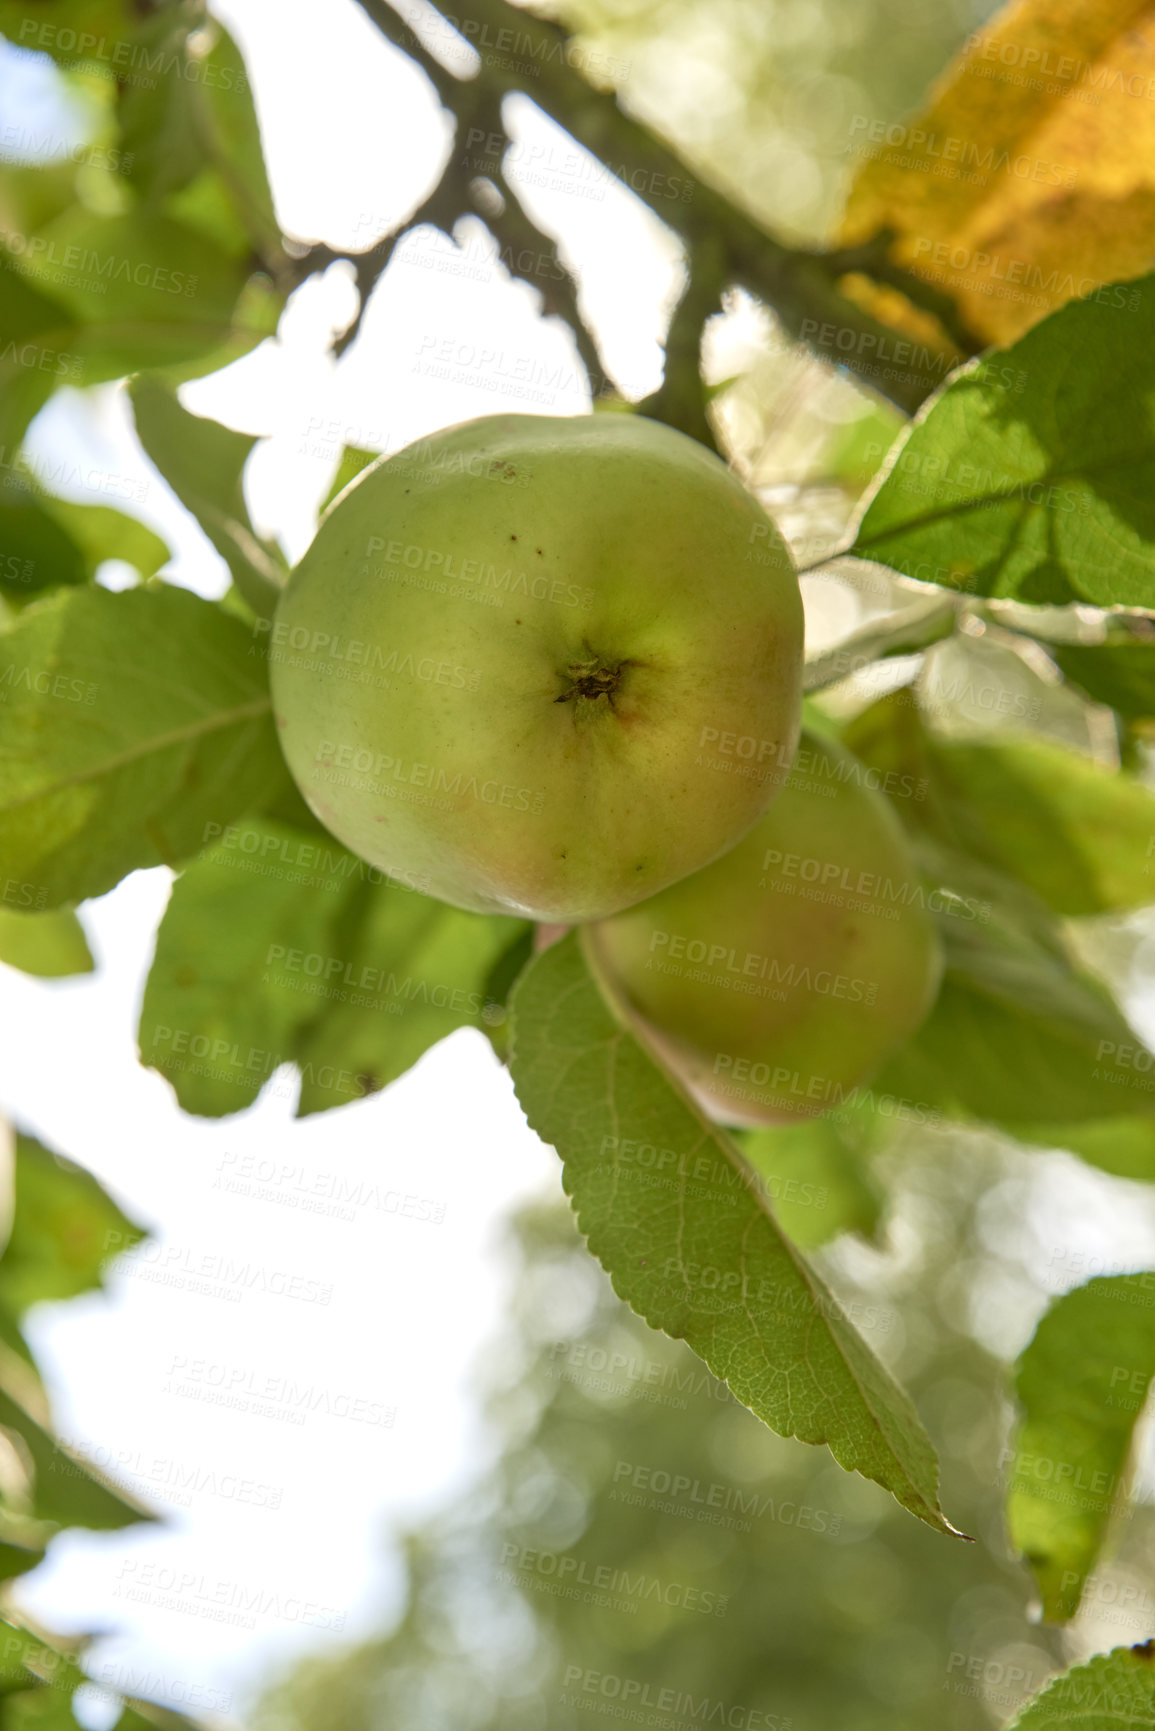 Buy stock photo Closeup of fresh green apples on sustainable orchard farm in farming countryside with branch leaves. View of an apple tree with healthy, delicious snack fruit growing for nutrition, diet or vitamins